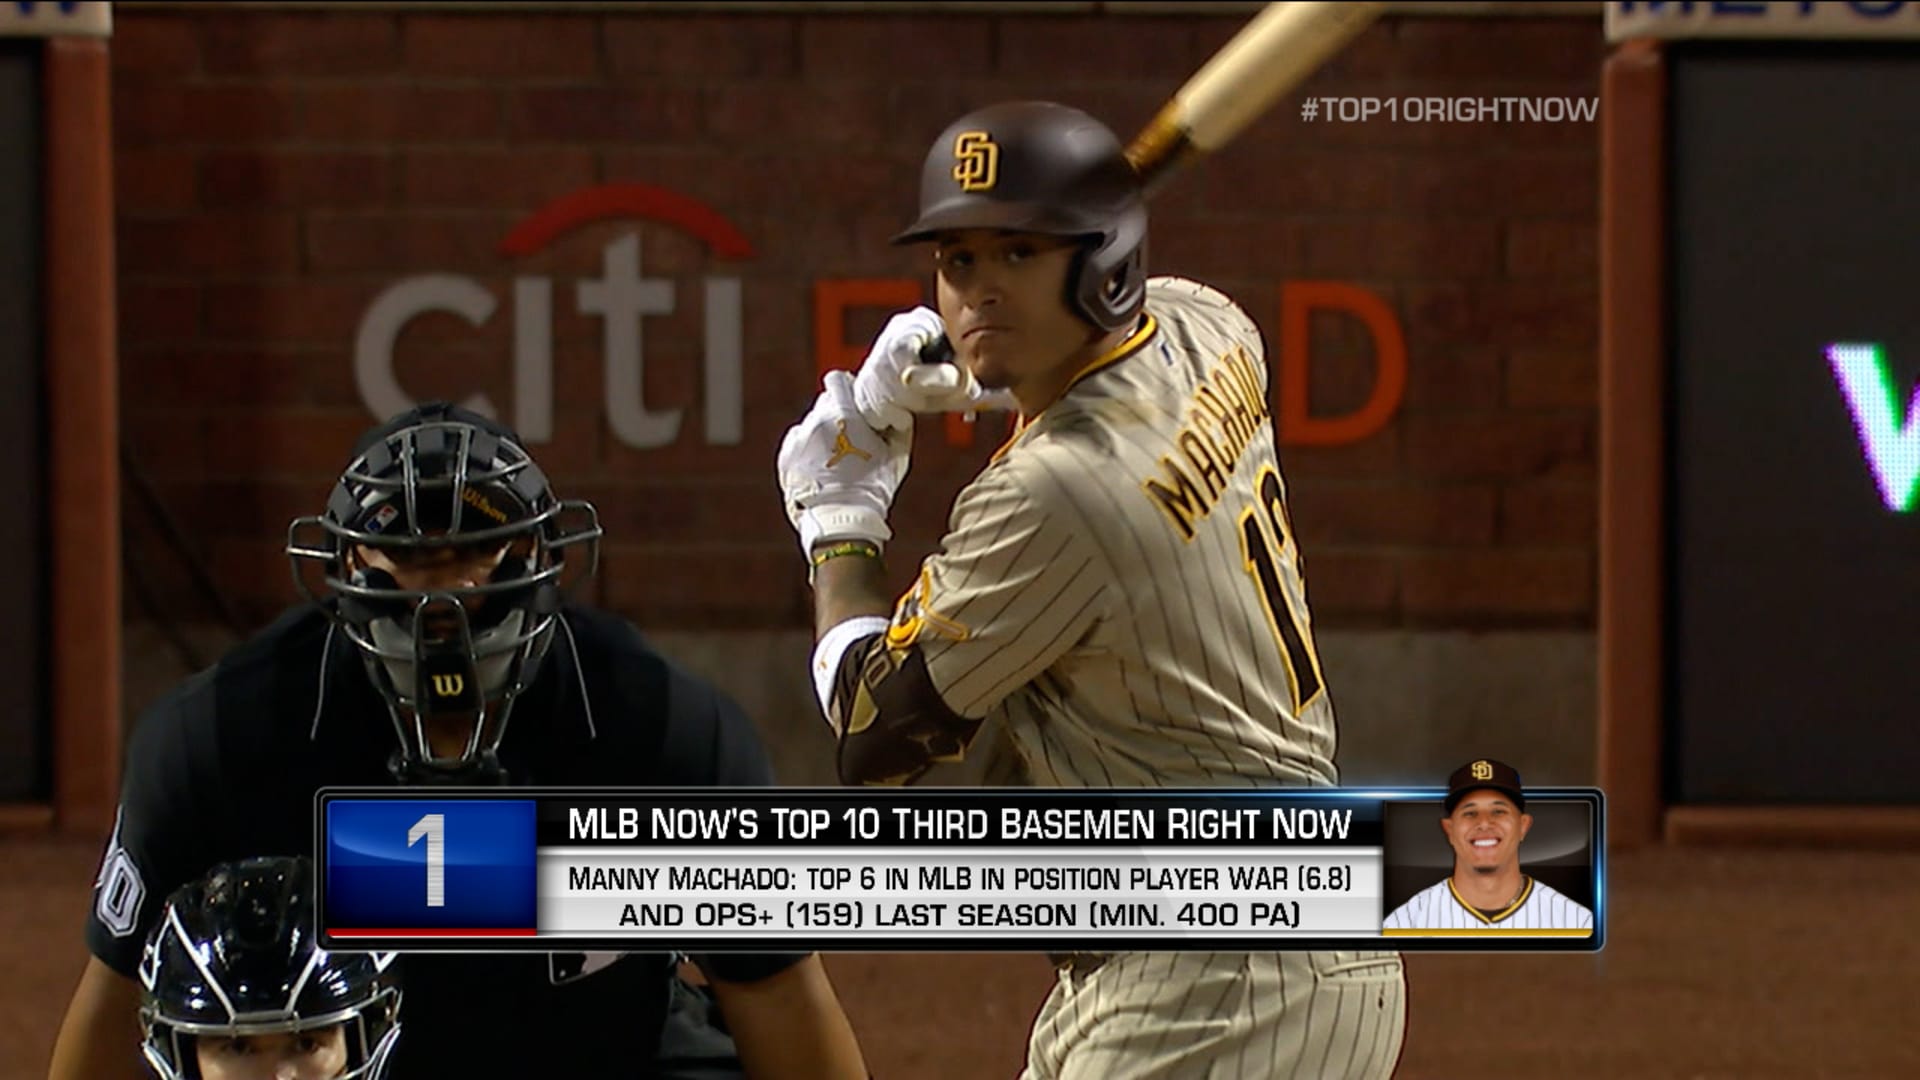 MLB Networks top 10 3rd basemen. KB is the most underrated player